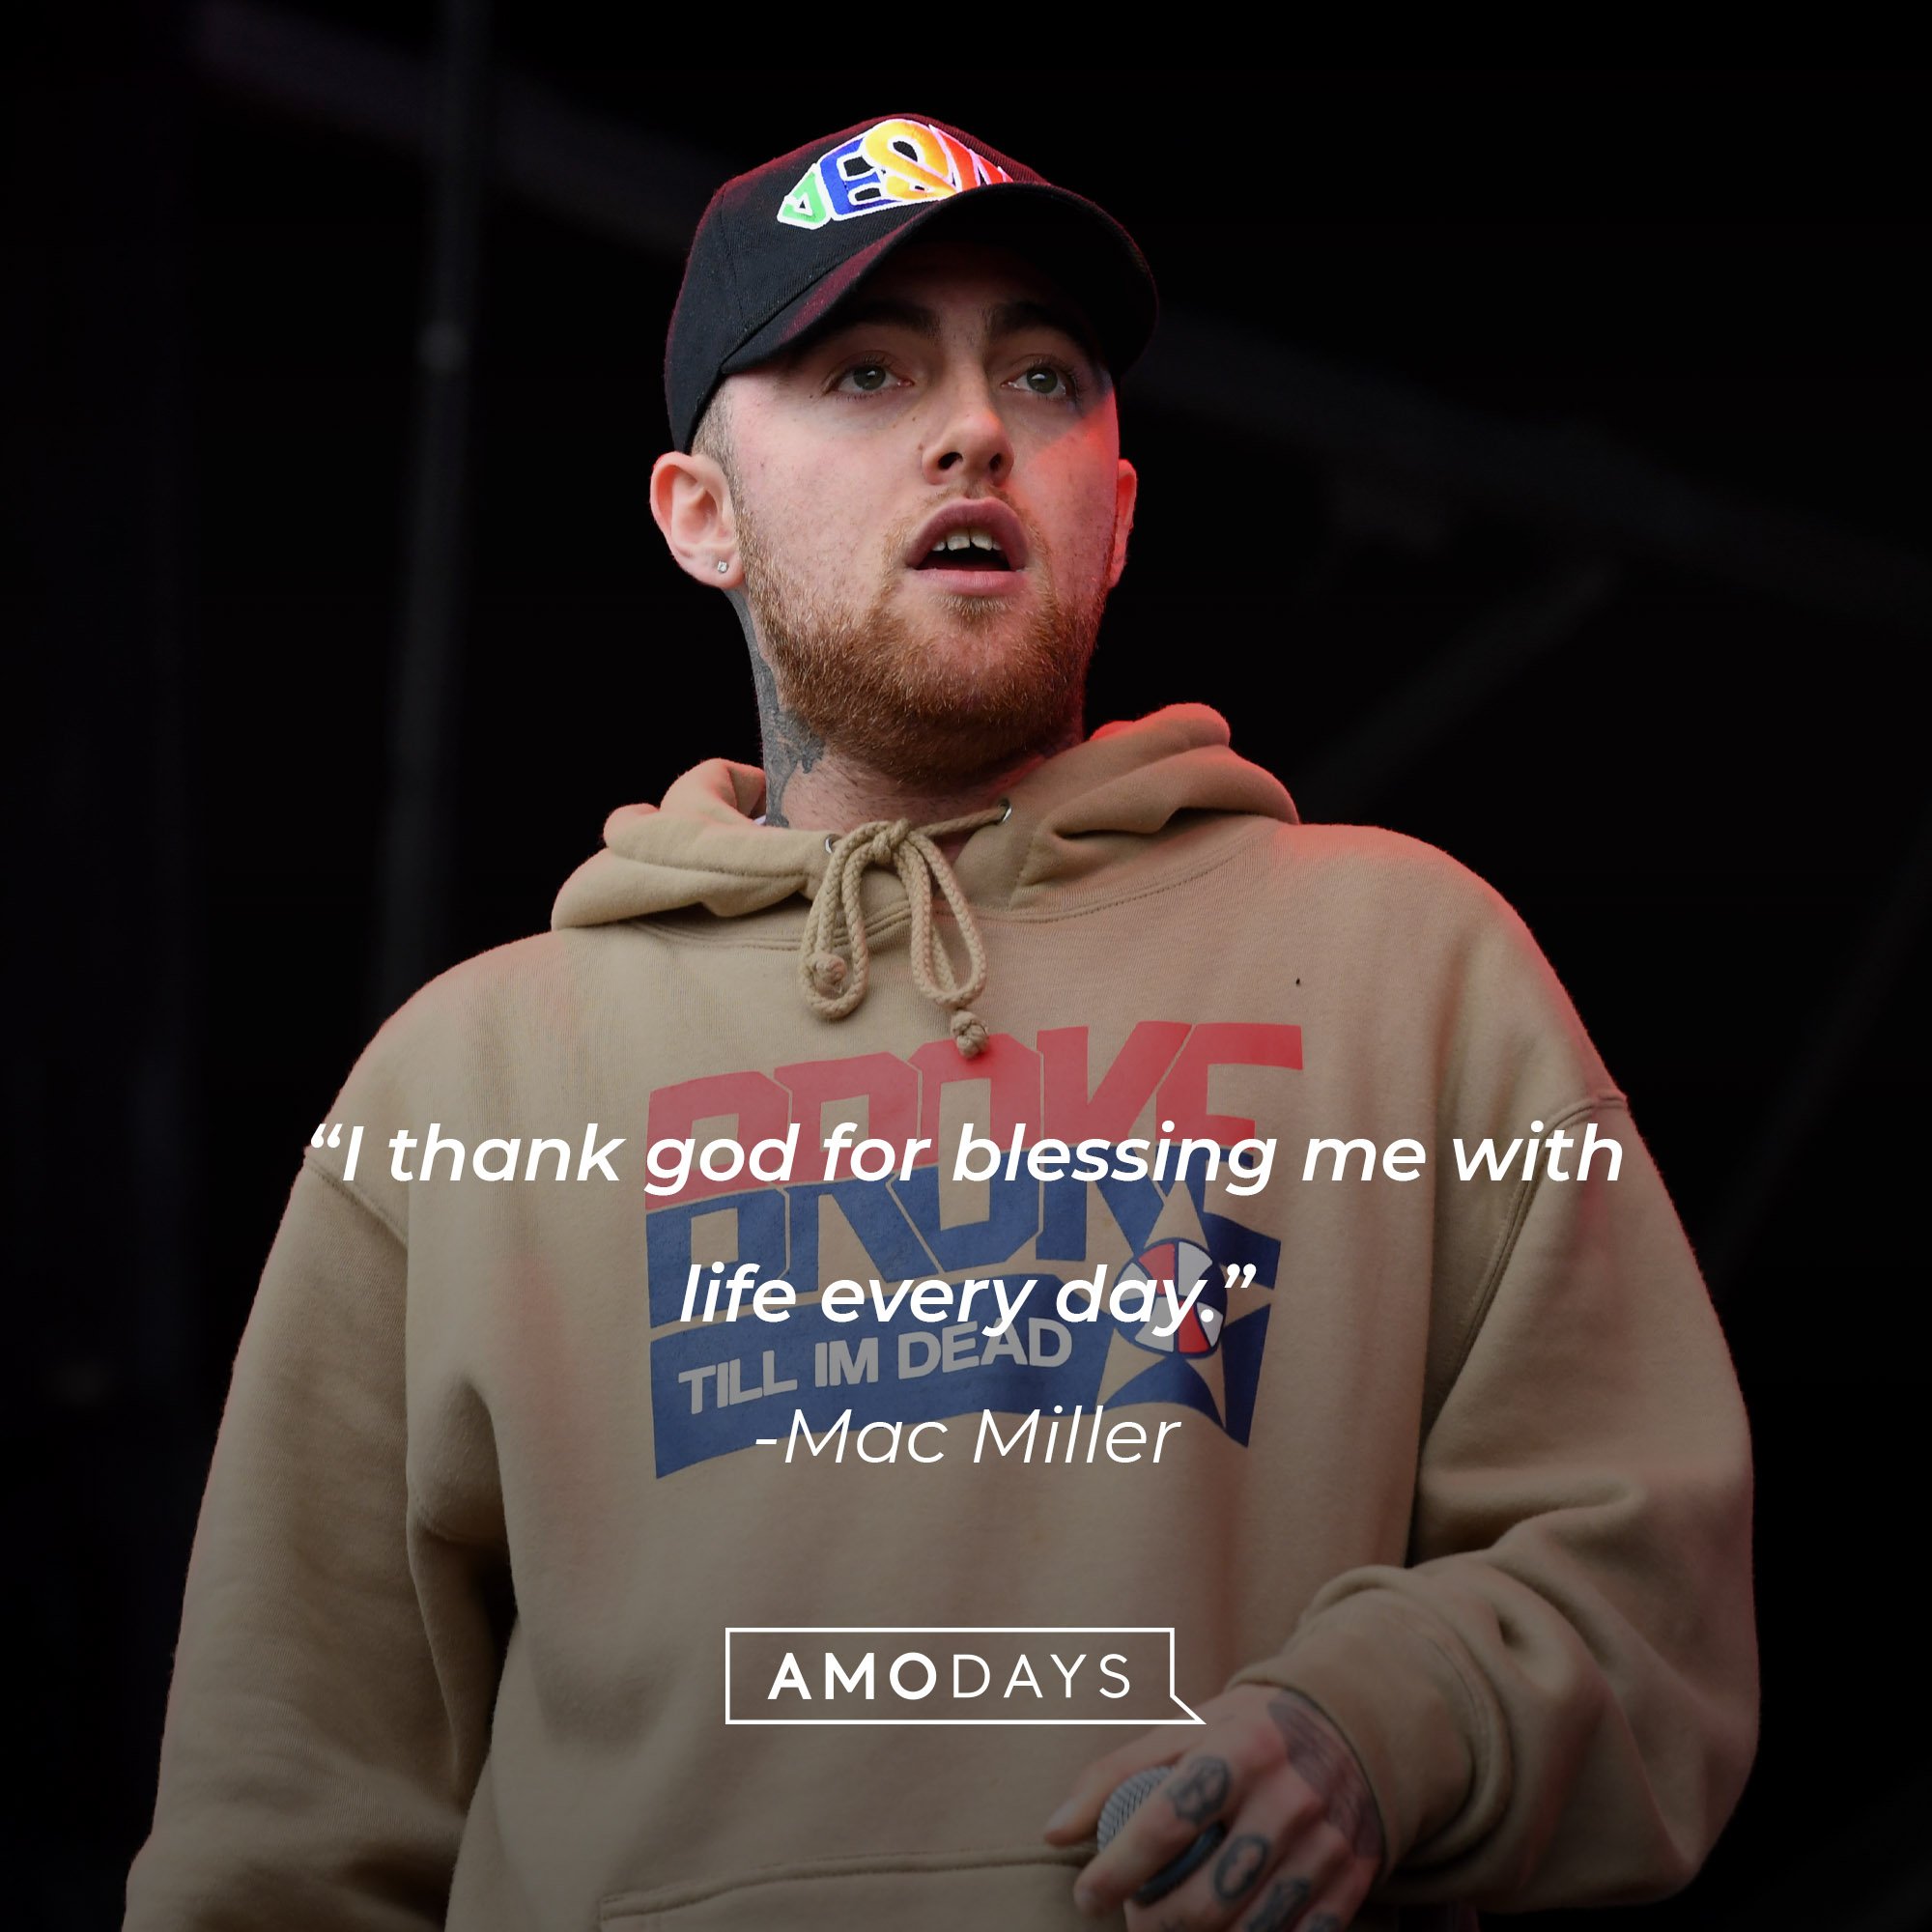 Mac Miller‘s quote: “I thank God for blessing me with life every day.” │Image: AmoDays